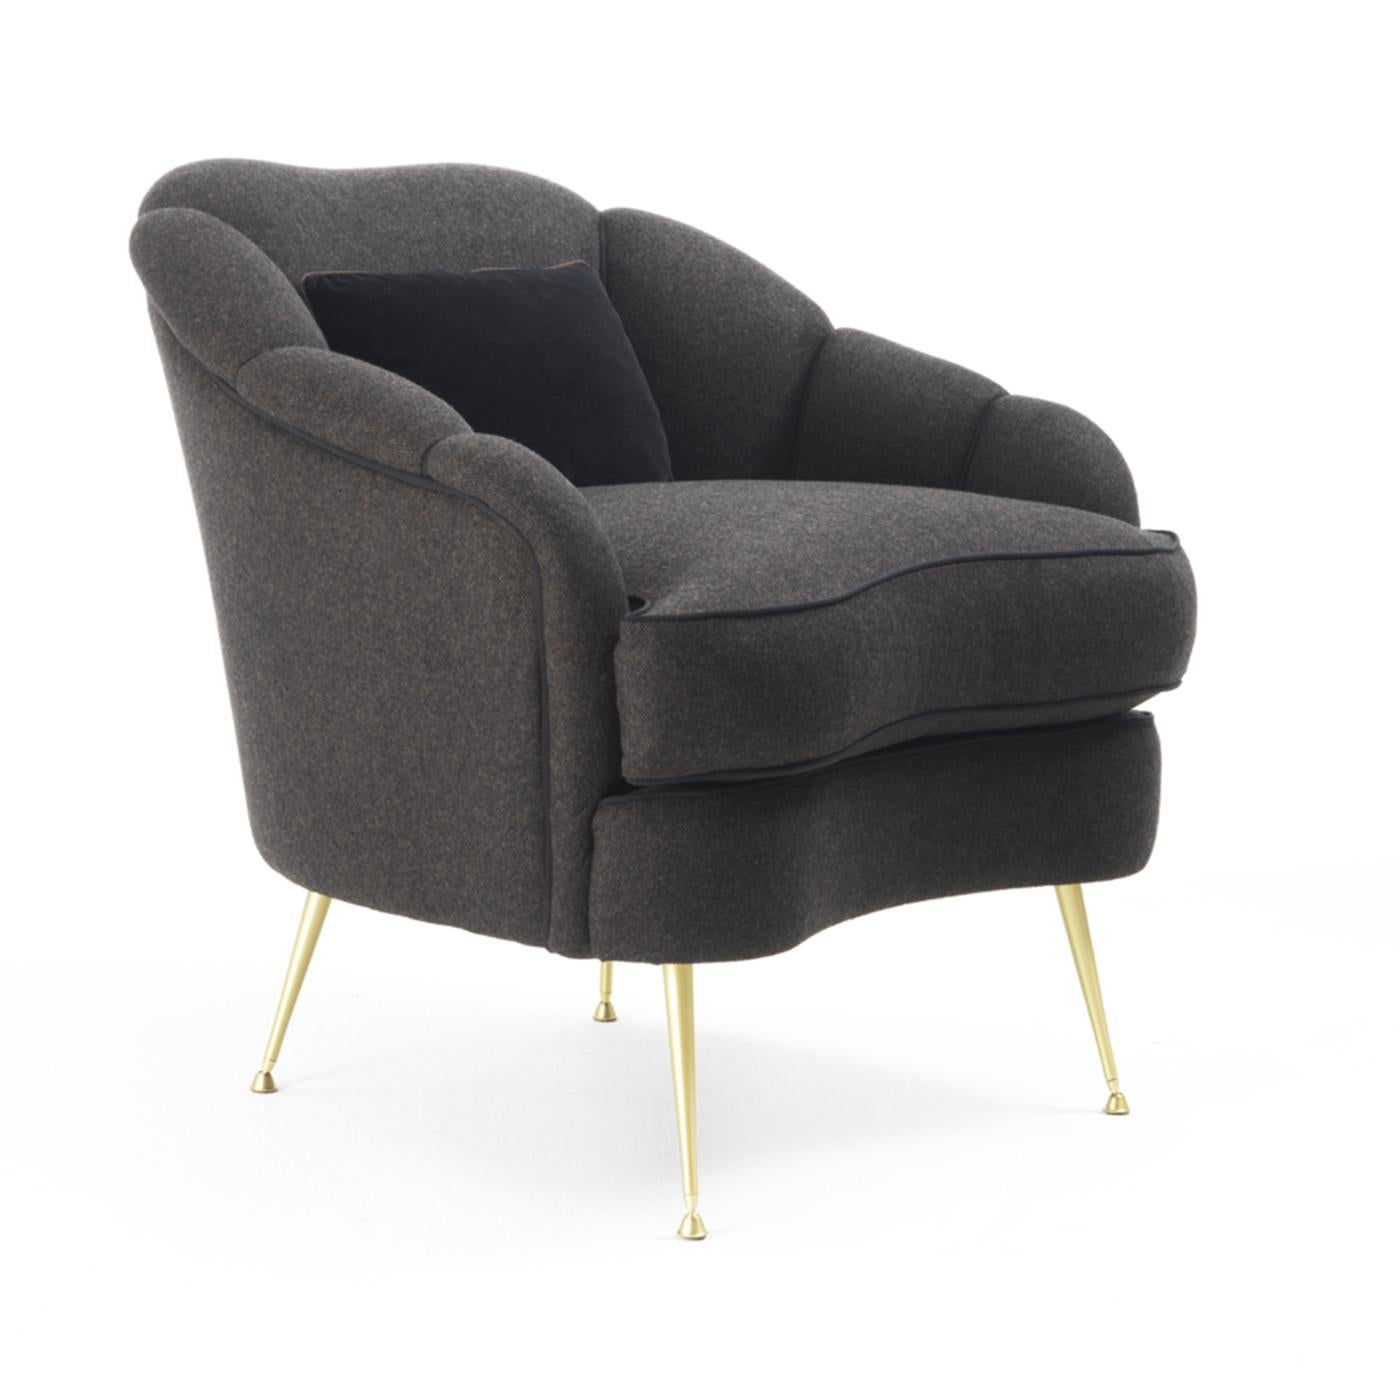 Part of the Camelia collection, and ideally paired with one of the coffee tables in the same series for a complete look, this elegant armchair mixes indulgent comfort with sleek design. The structure is in solid wood and plywood and supports a